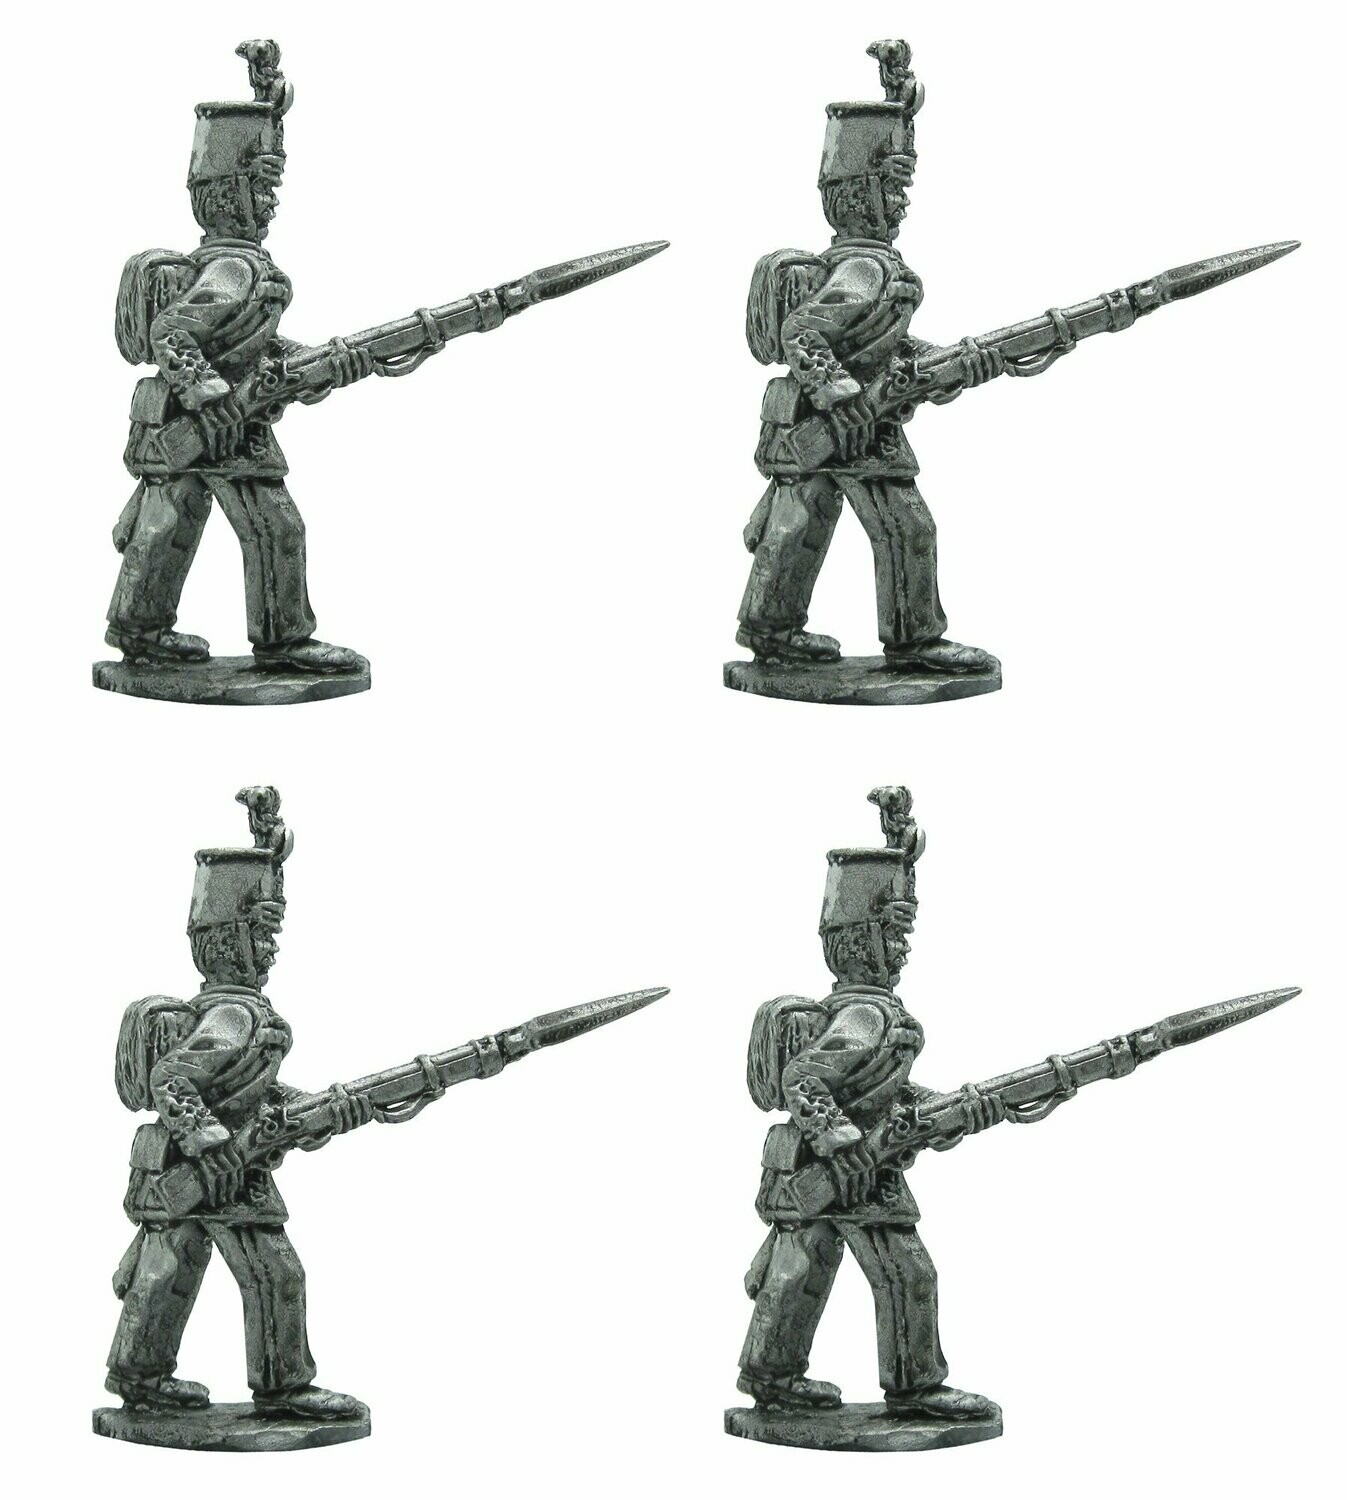 28mm Hungarian National Guard from Pest advancing x 4